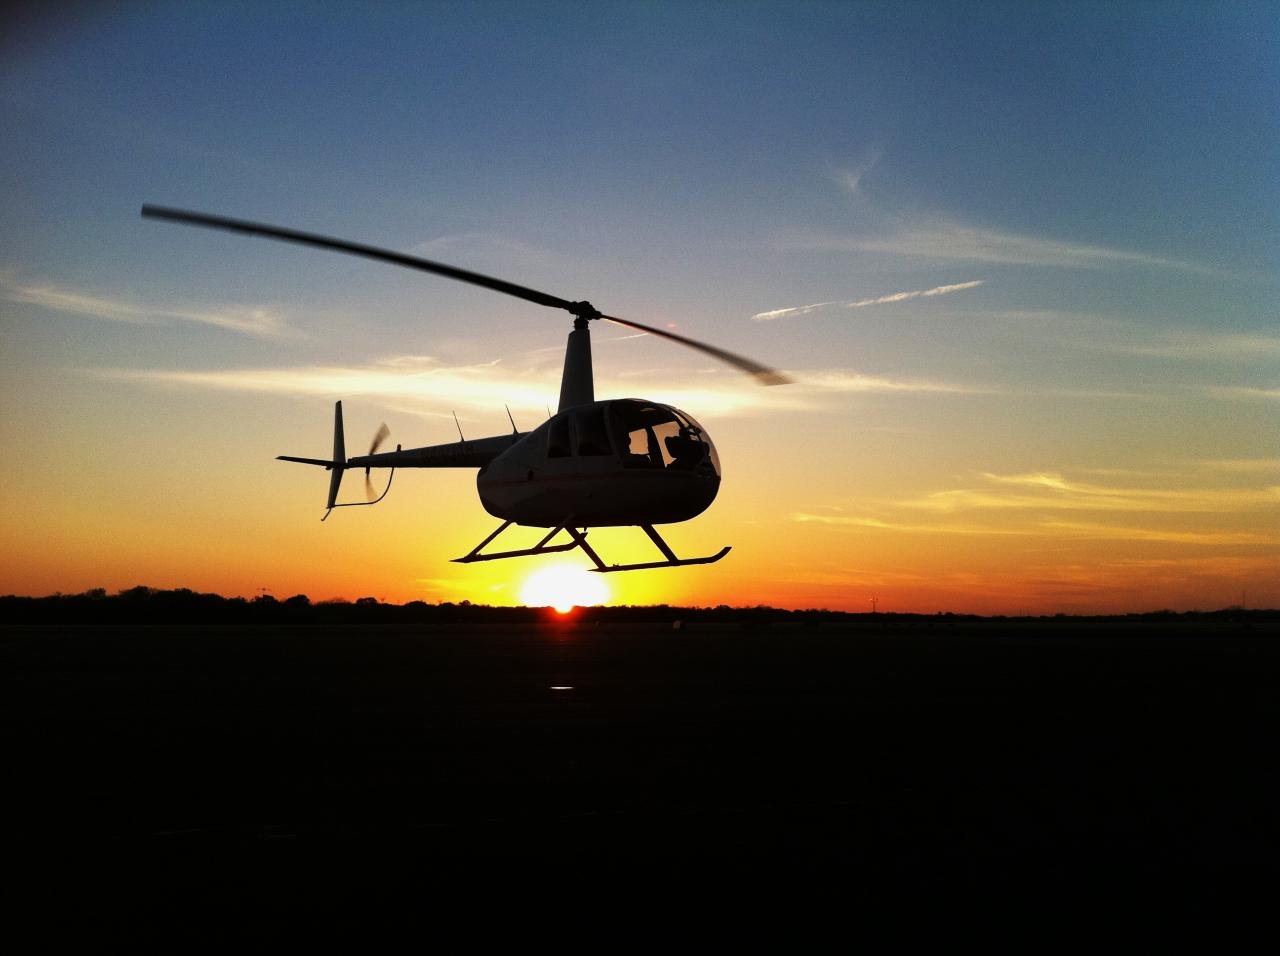 sunset flight, sun going down, helicopter, romantic, adventure, brisbane, queensland, special someone